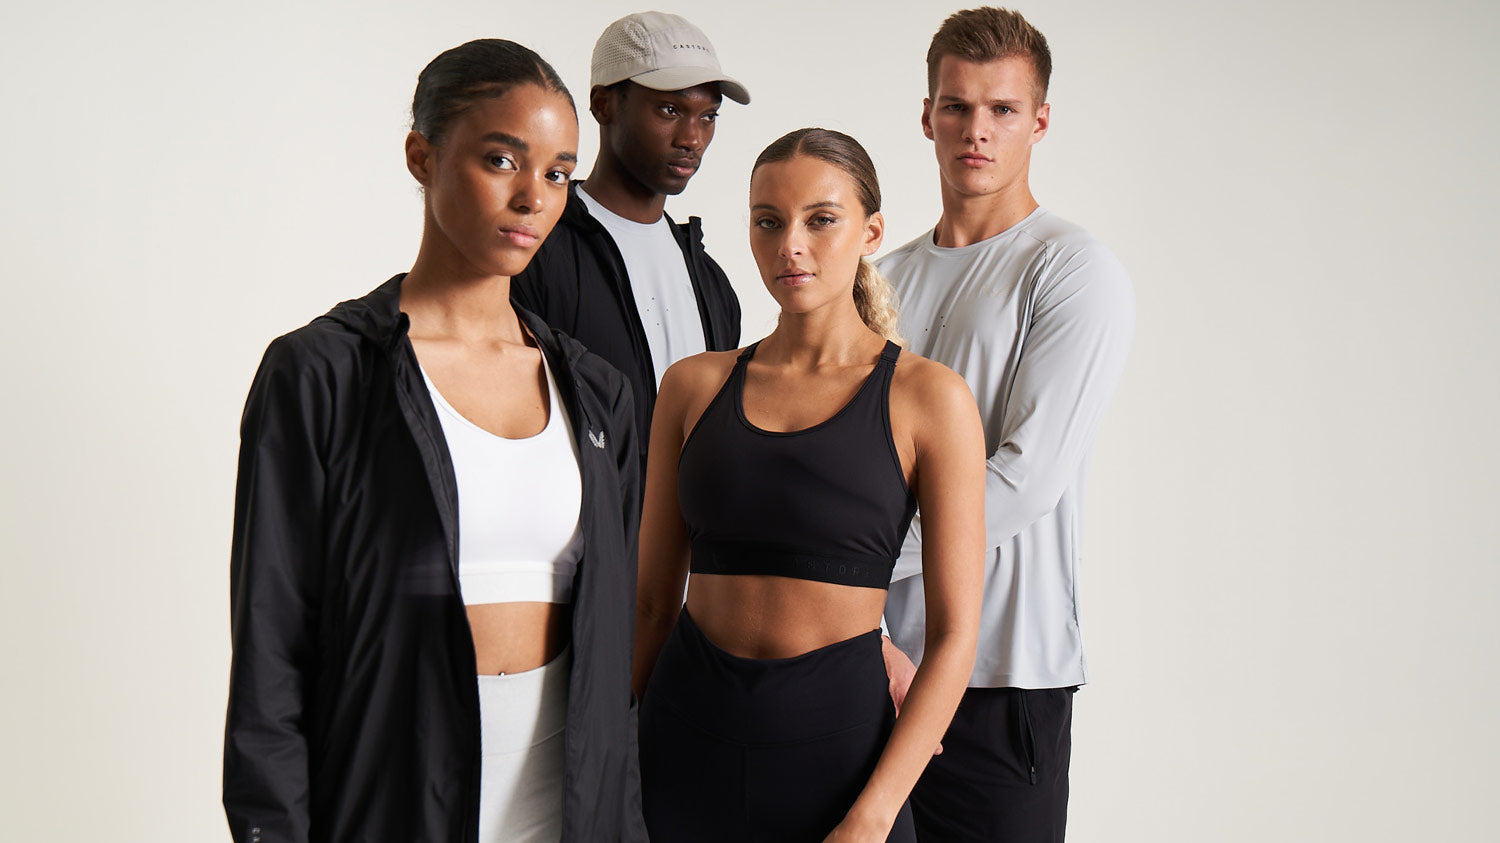 Activewear vs athleisure: What's the difference?